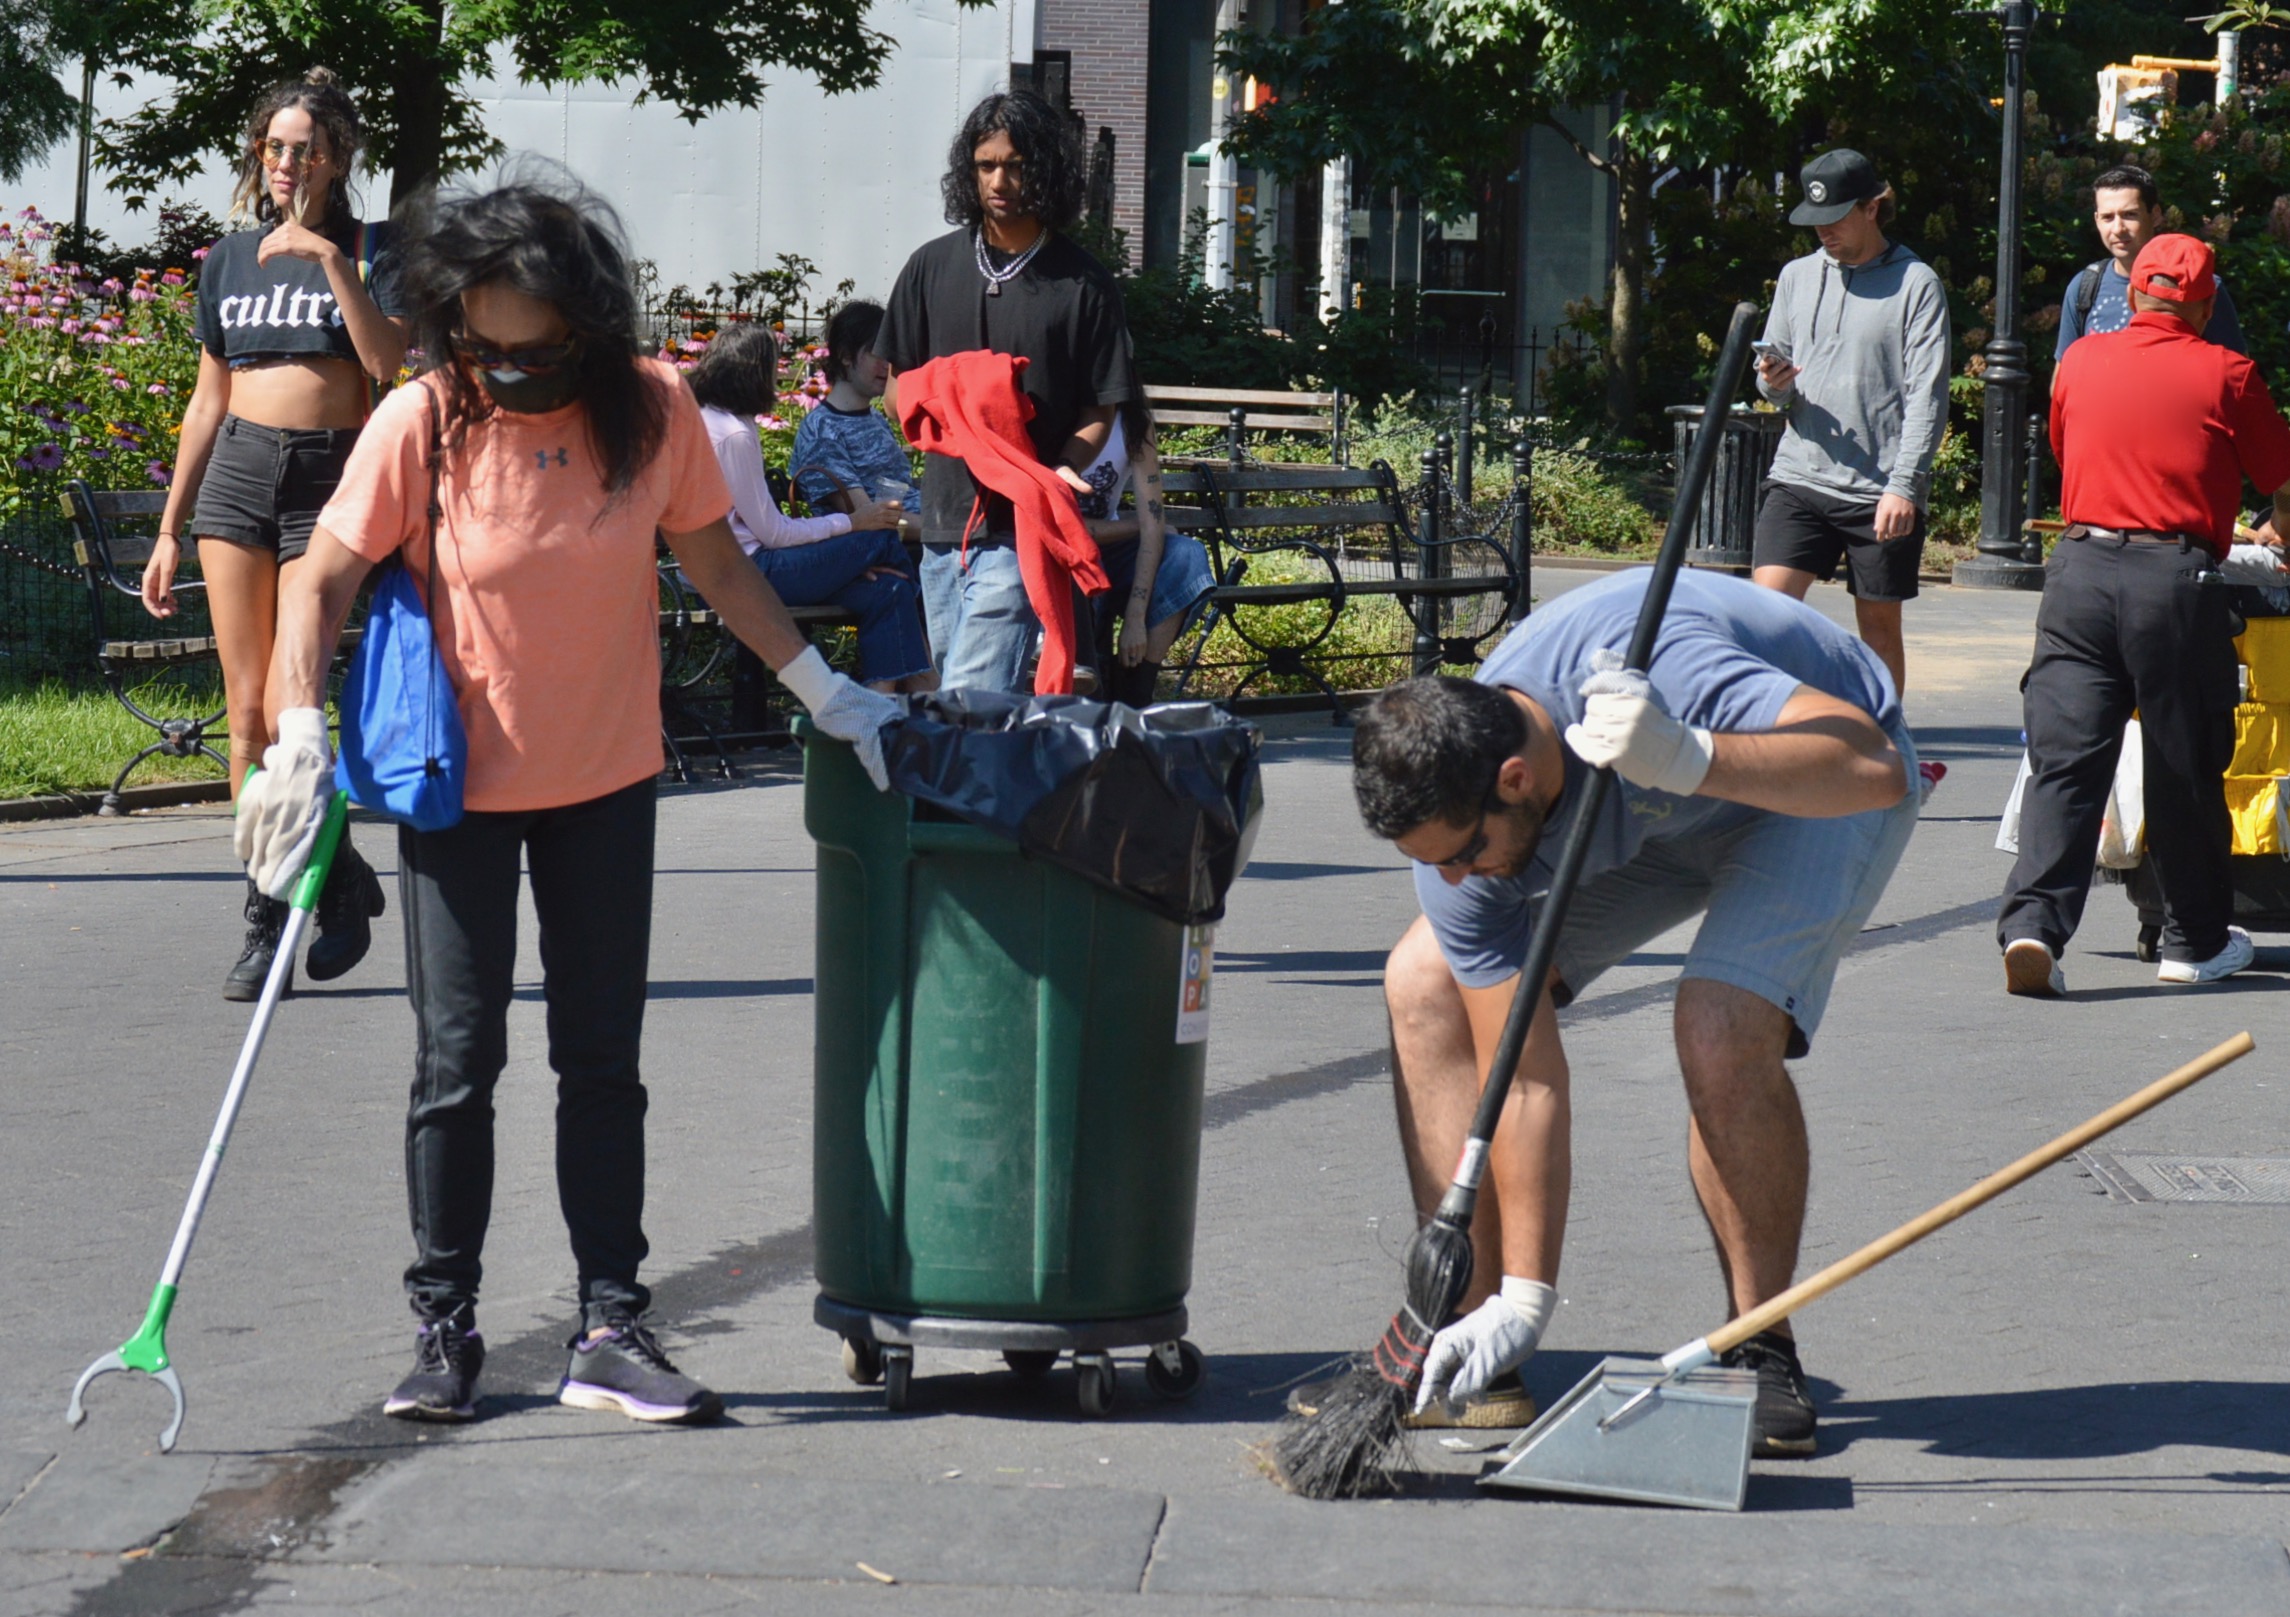 two volunteers use tools to pick up litter while people walk past them